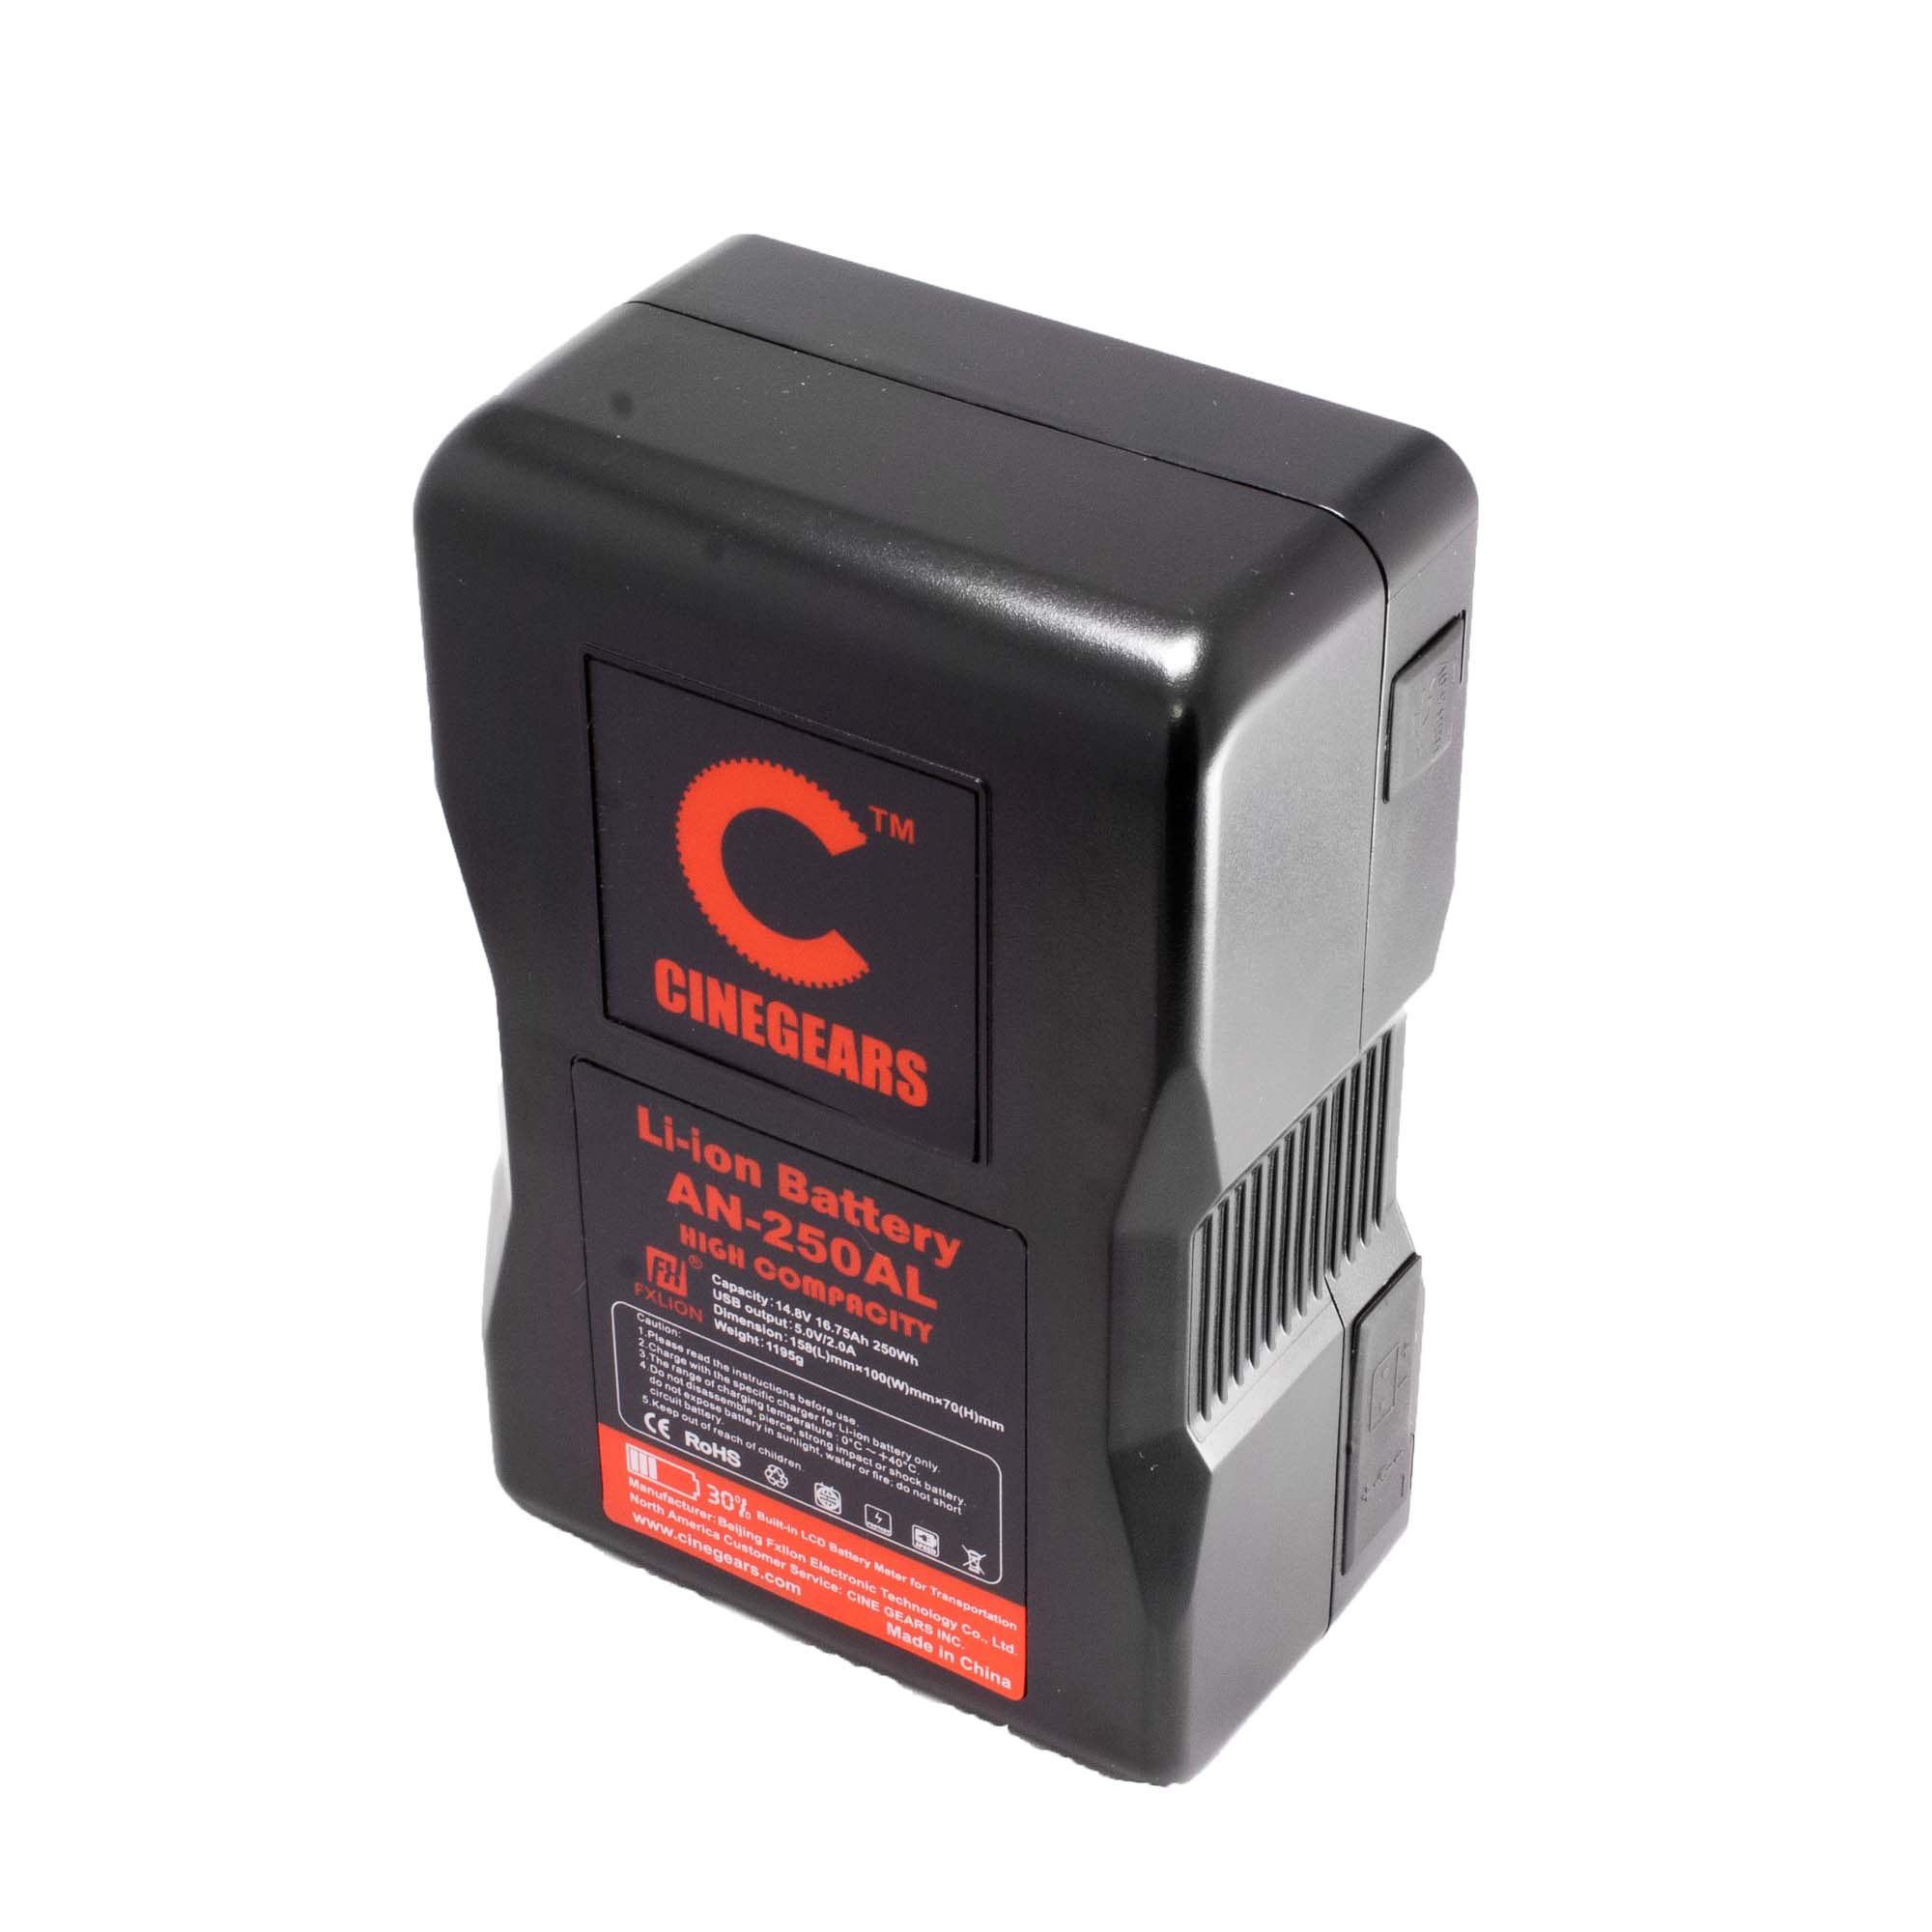 CINEGEARS 250Wh High-Capacity Anton Bauer Battery